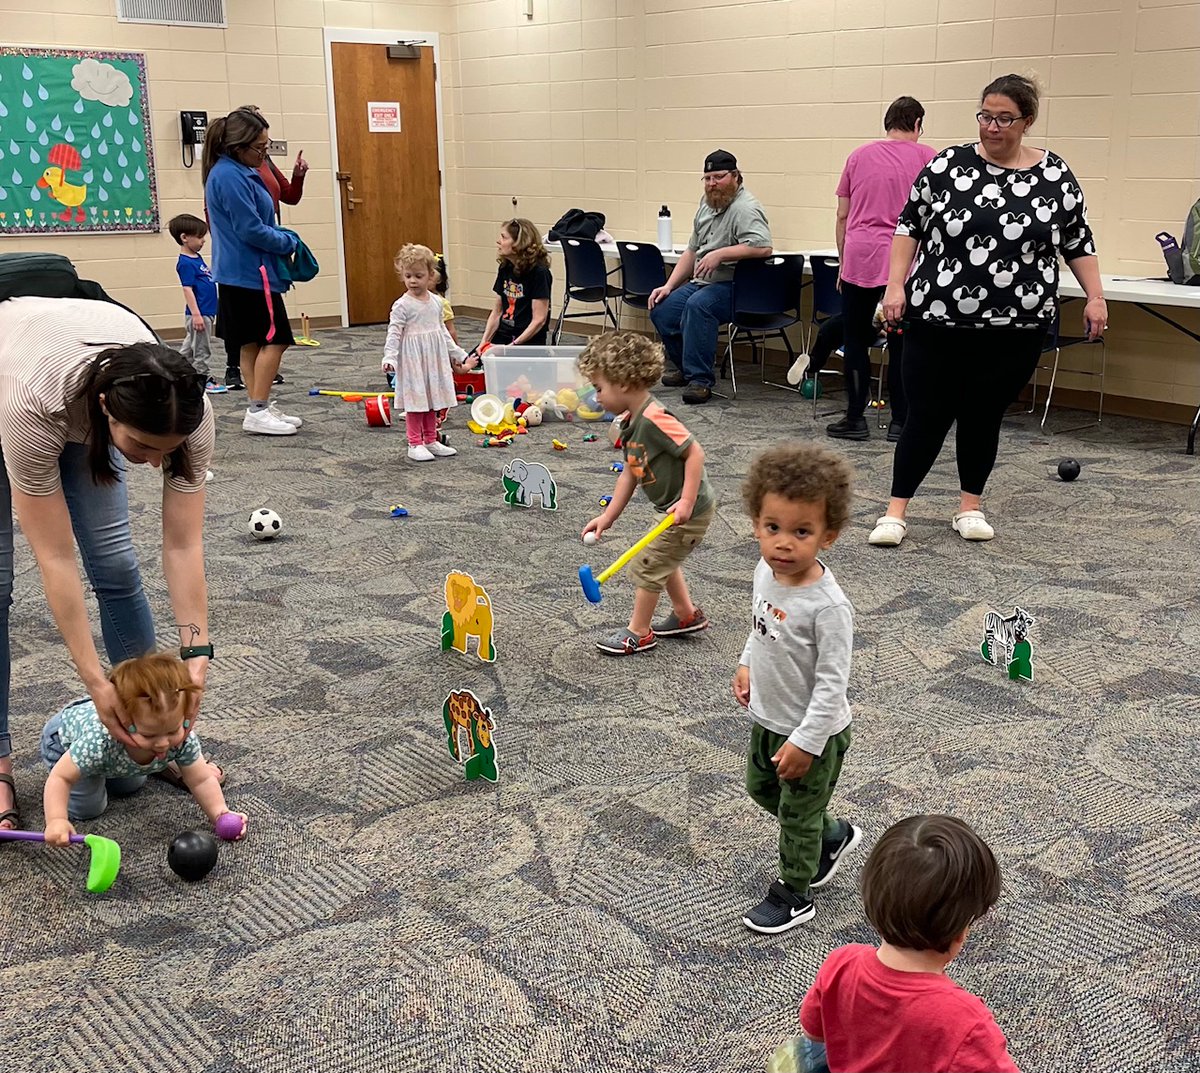 We had so much fun at our toddler play date at @MunsterInLib! #NWIndiana